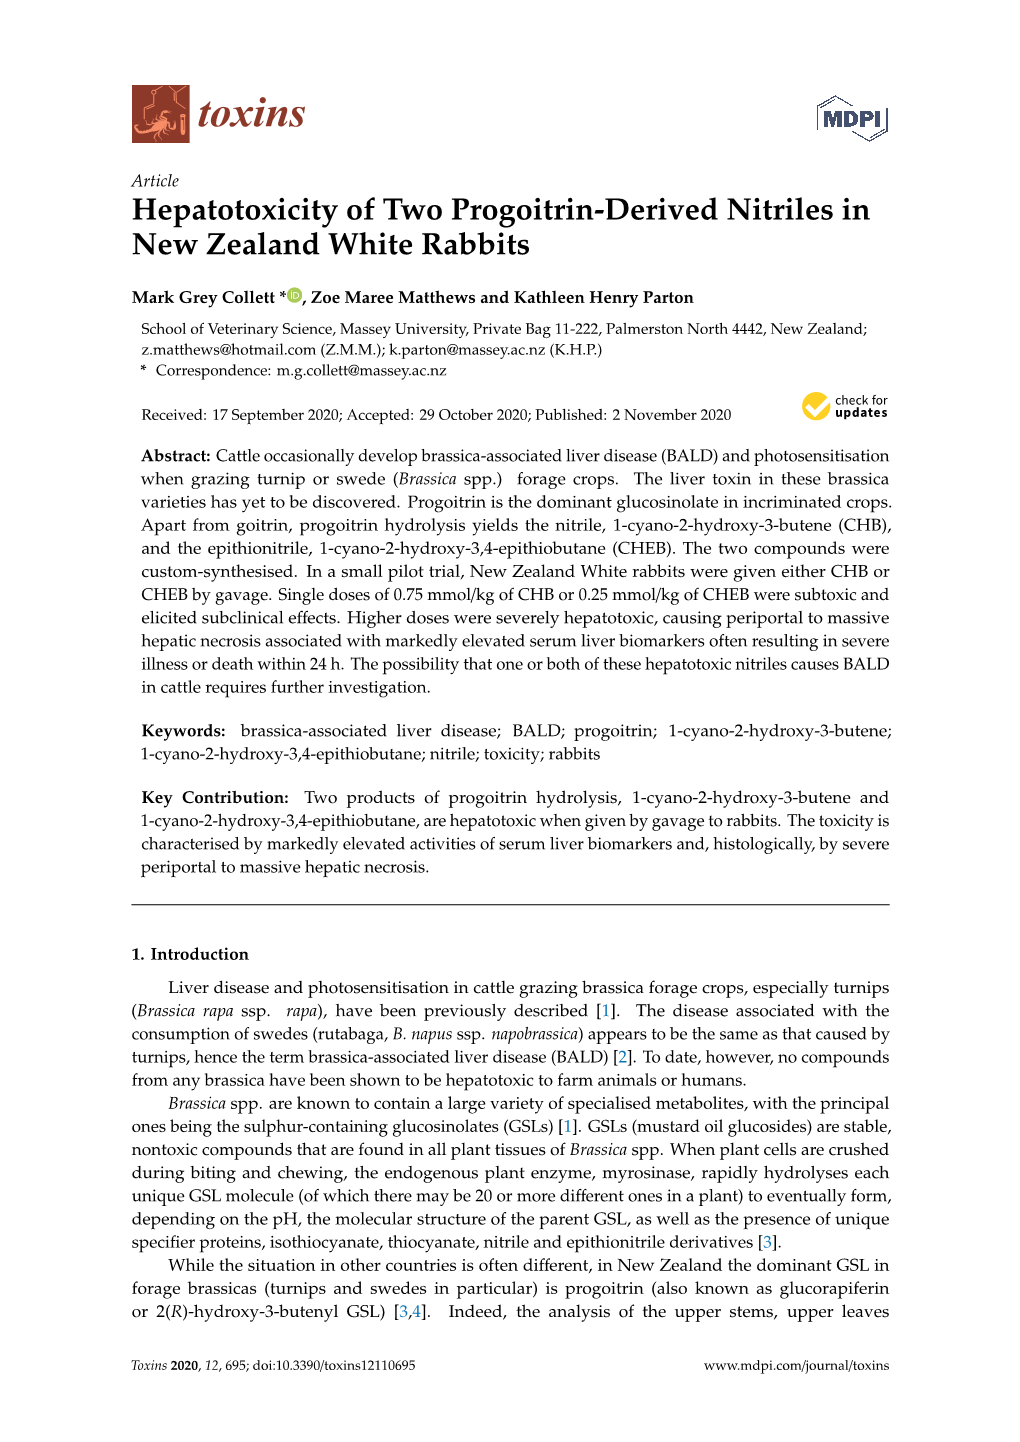 Hepatotoxicity of Two Progoitrin-Derived Nitriles in New Zealand White Rabbits